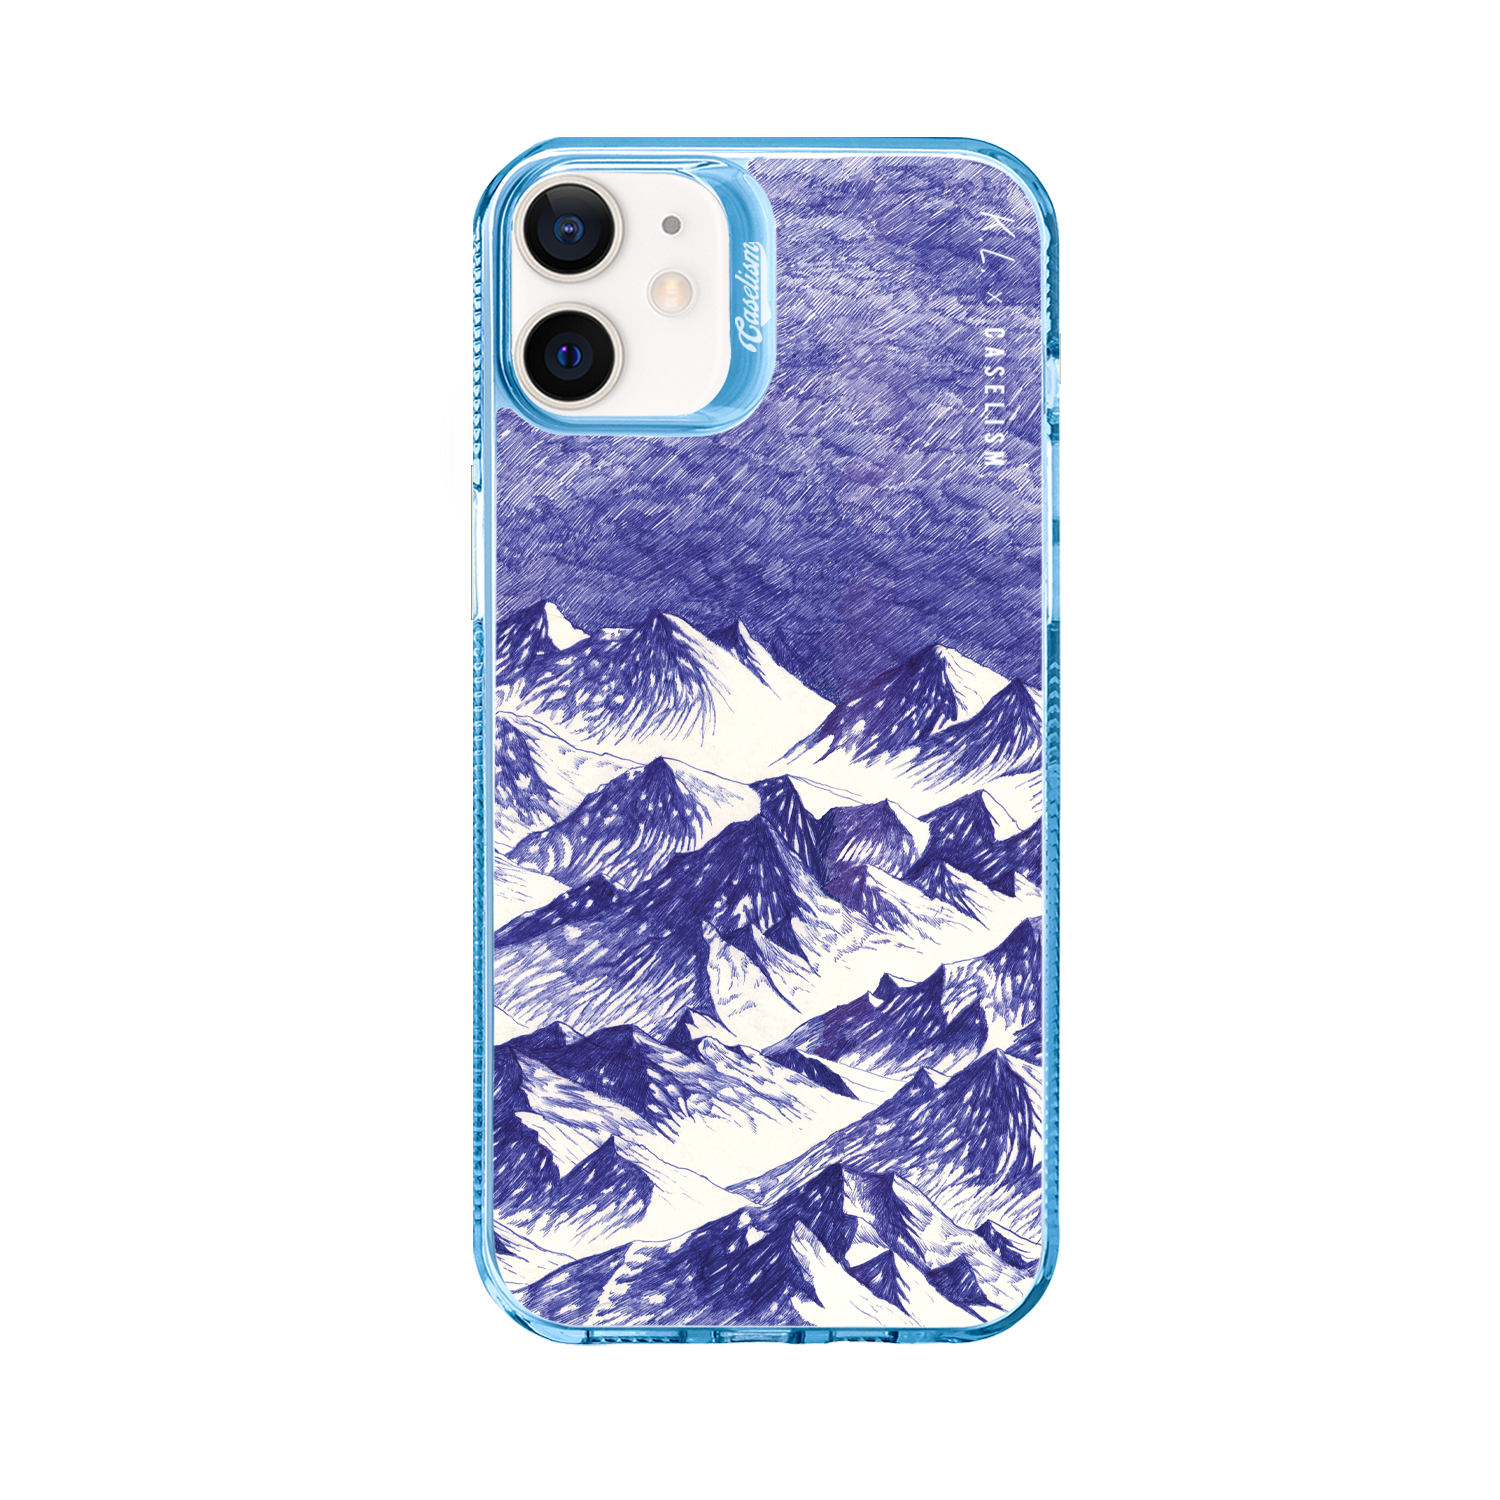 KEVI003 - ColorLite Case for iPhone